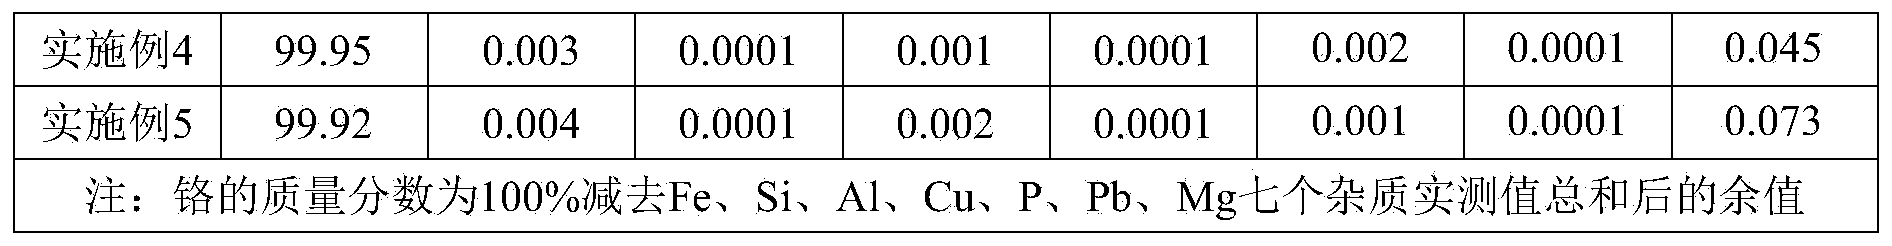 Method for producing high-purity metal chromium by reducing anhydrous chromium chloride through utilizing metal magnesium